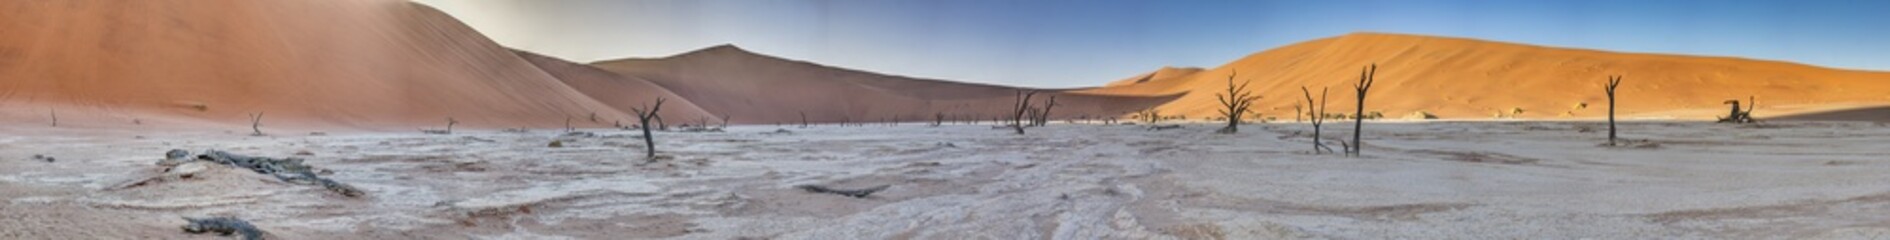 Panoramic picture of the Deadvlei salt pan in the Namib Desert with dead trees in front of red sand...